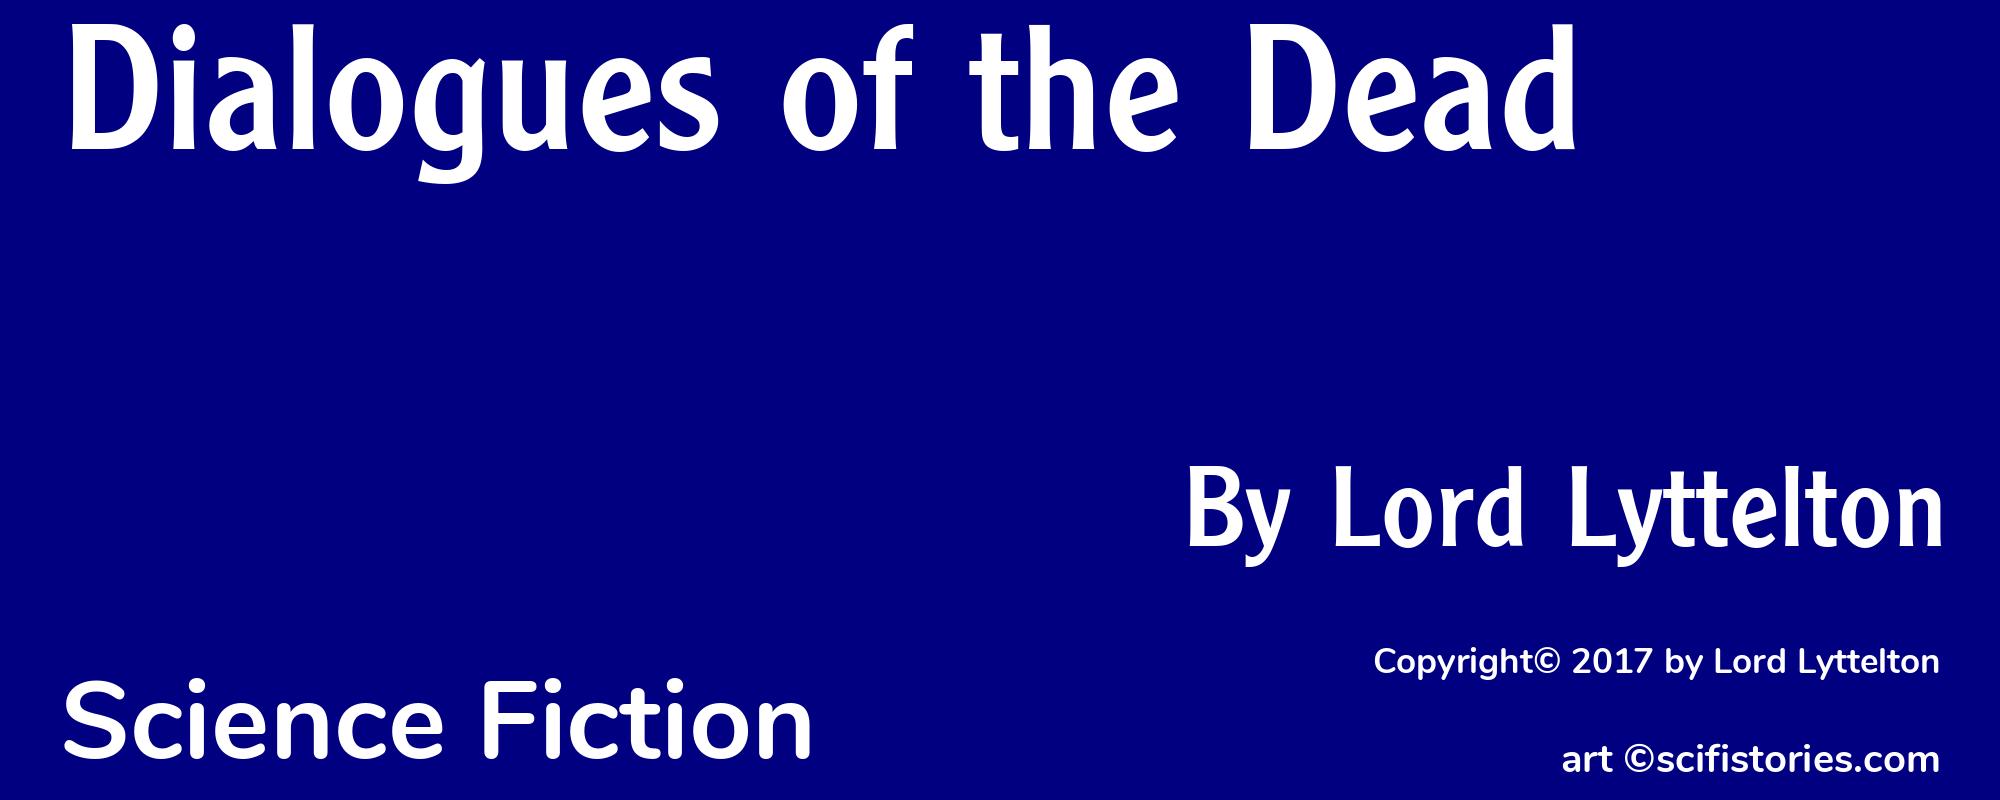 Dialogues of the Dead - Cover